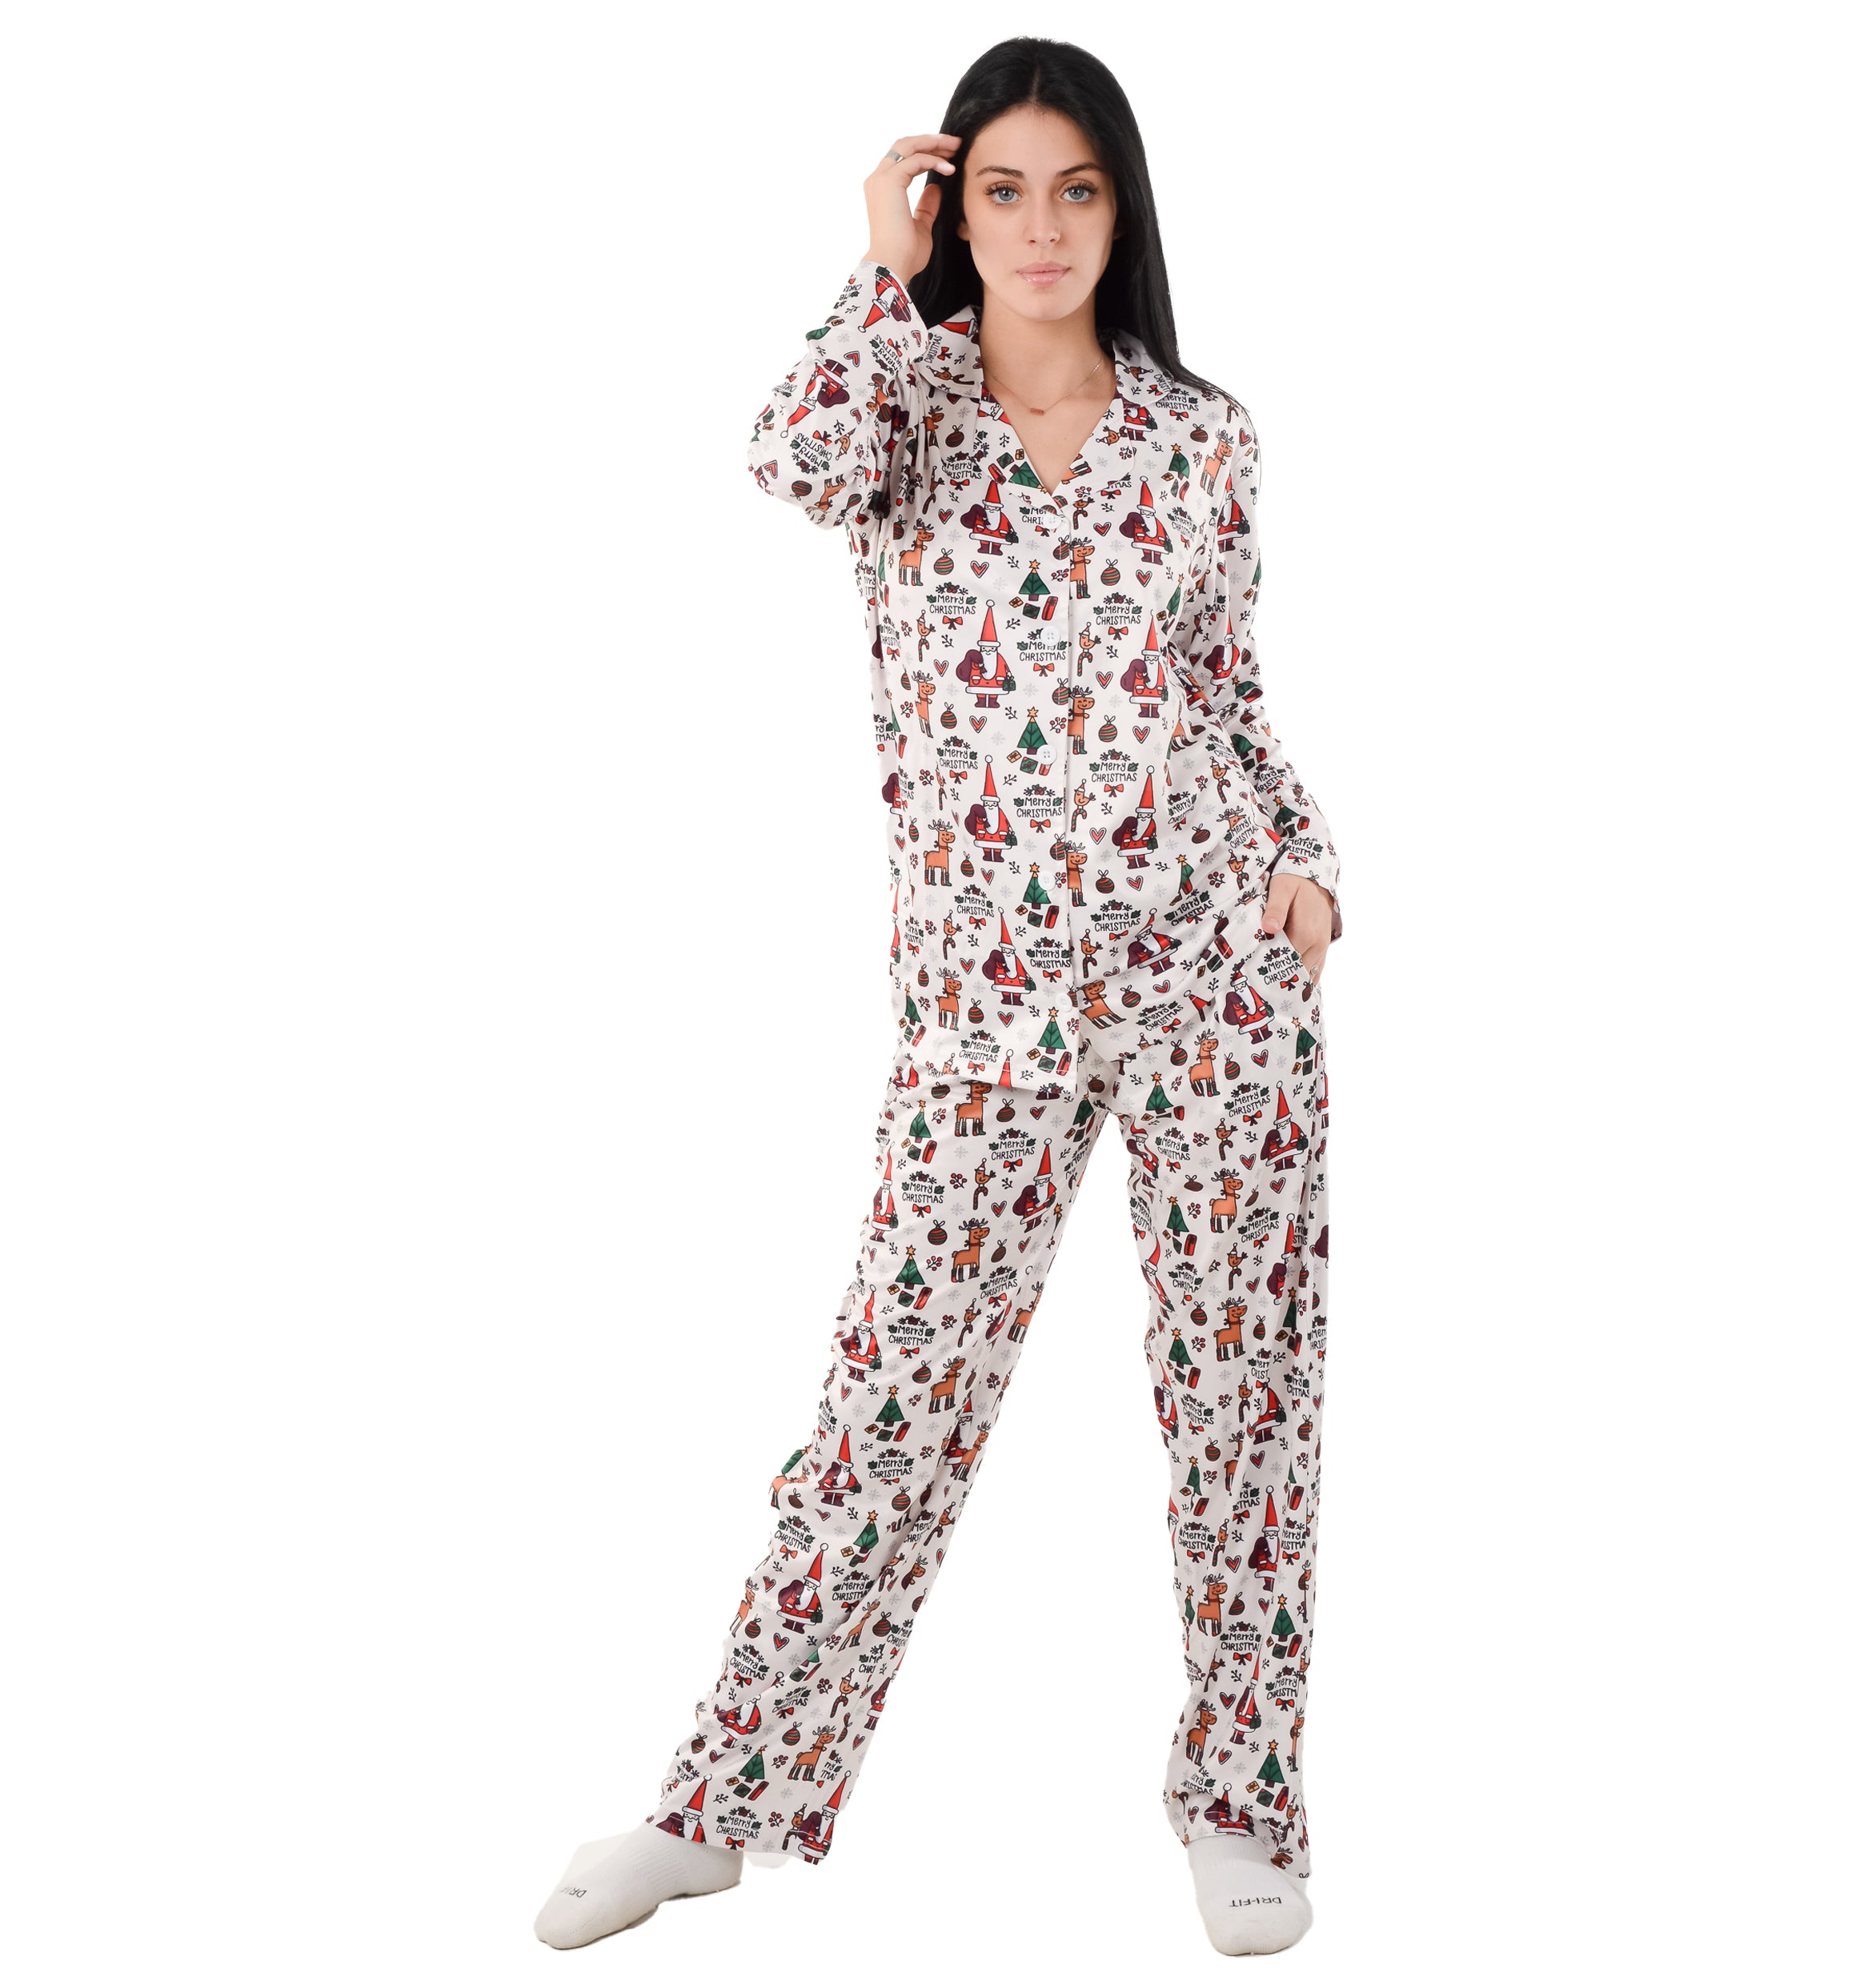 LSOLMD Overstock Items Clearance All Prime Family Christmas Pajamas  Matching Sets Xmas Matching Pjs for Adults Holiday Home Xmas Sleepwear Set  Loungewear at  Women's Clothing store